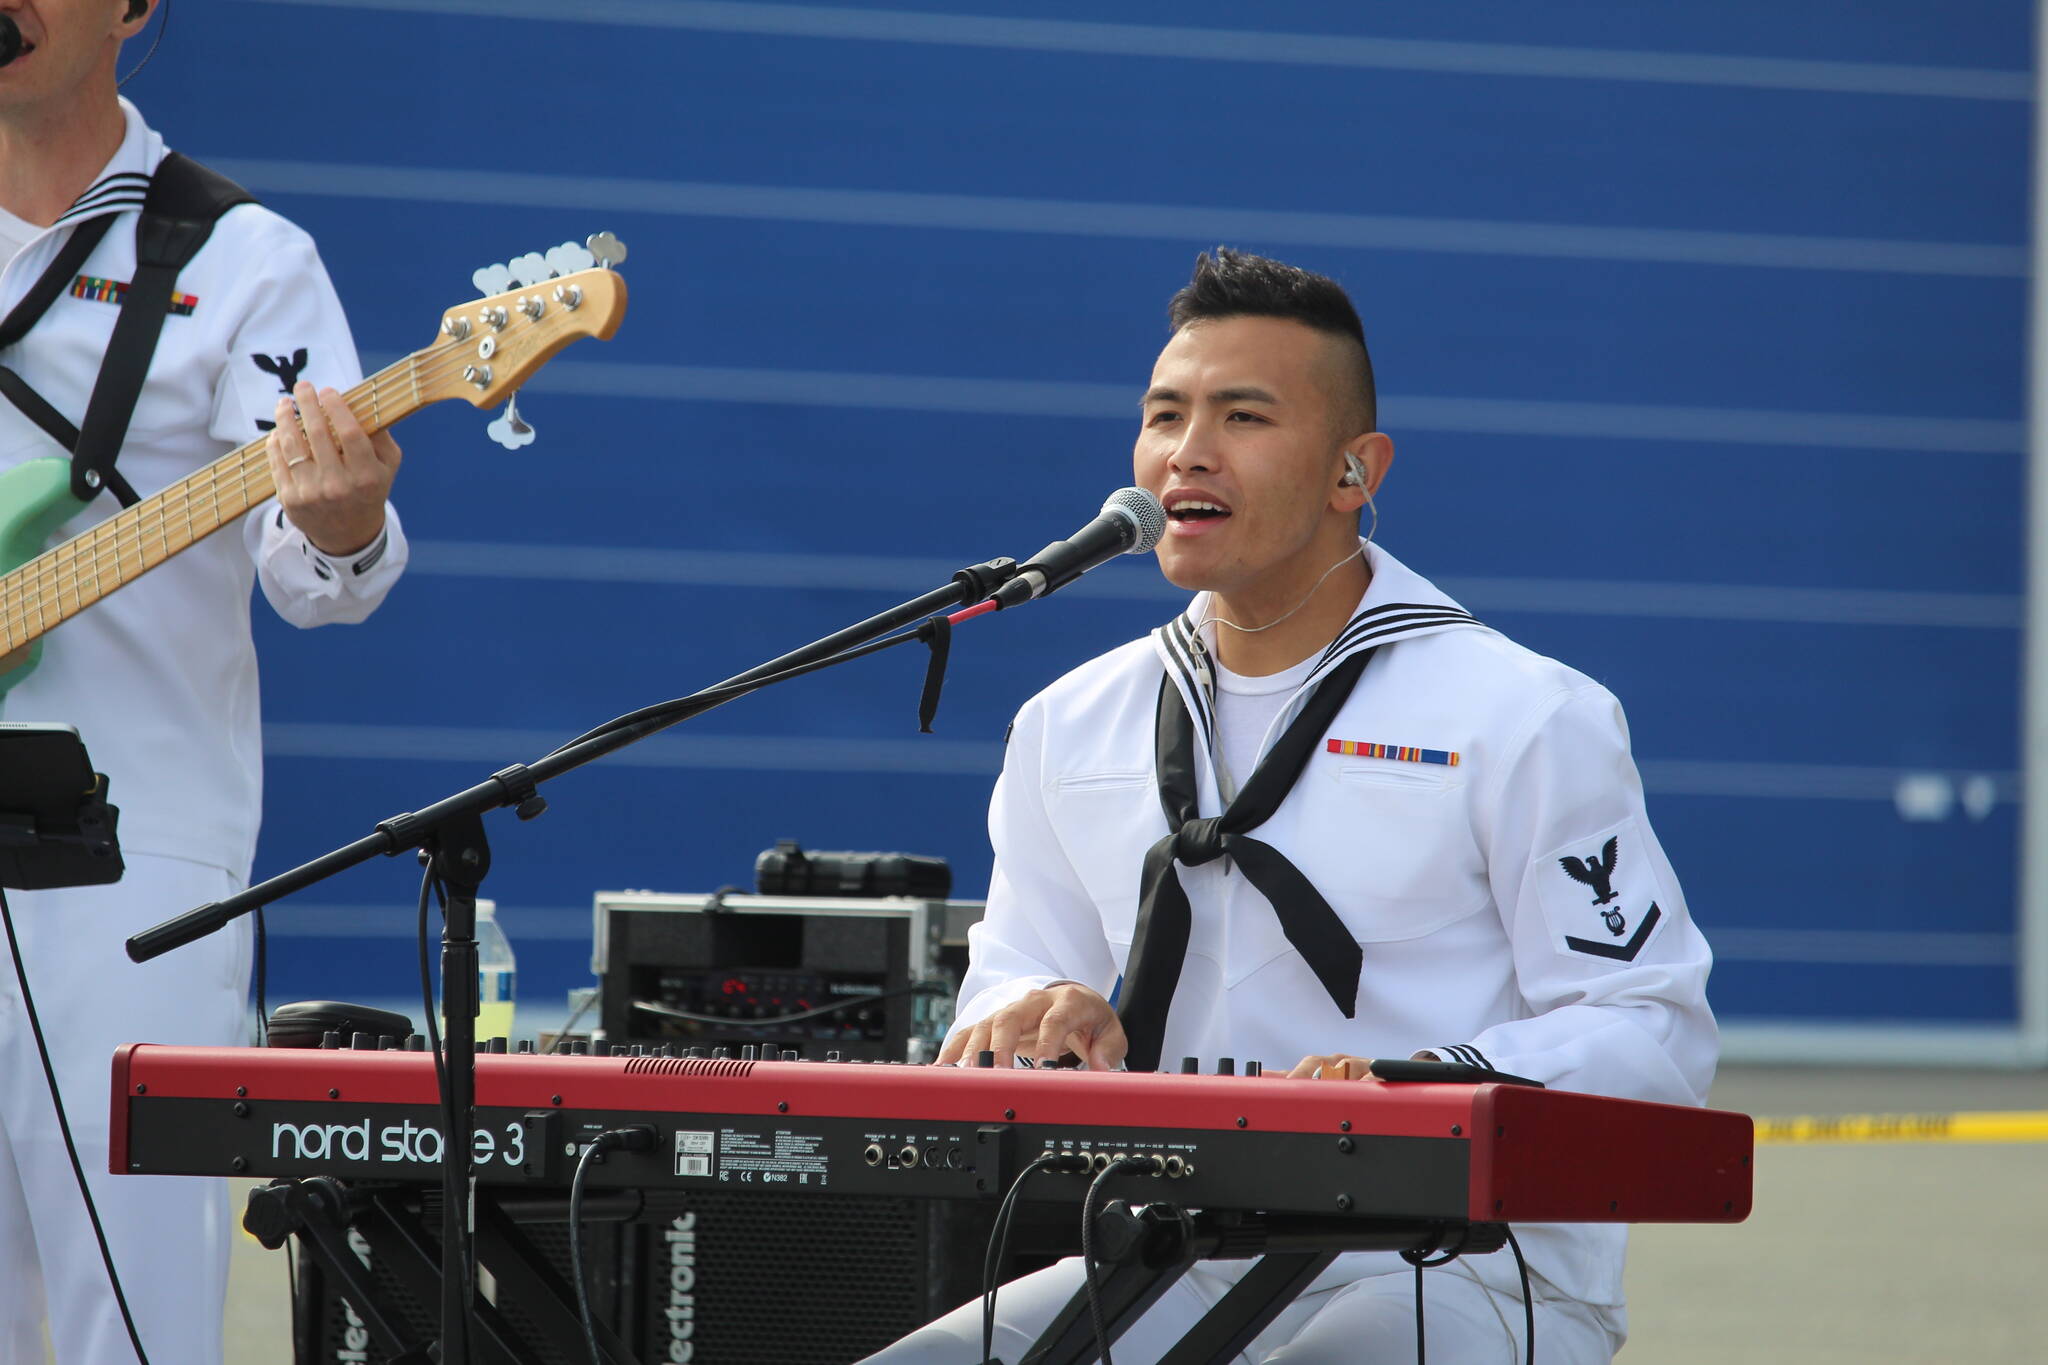 Photo by Karina Andrew/Whidbey News-Times
The Navy Band plays at the base open house Sept. 17.